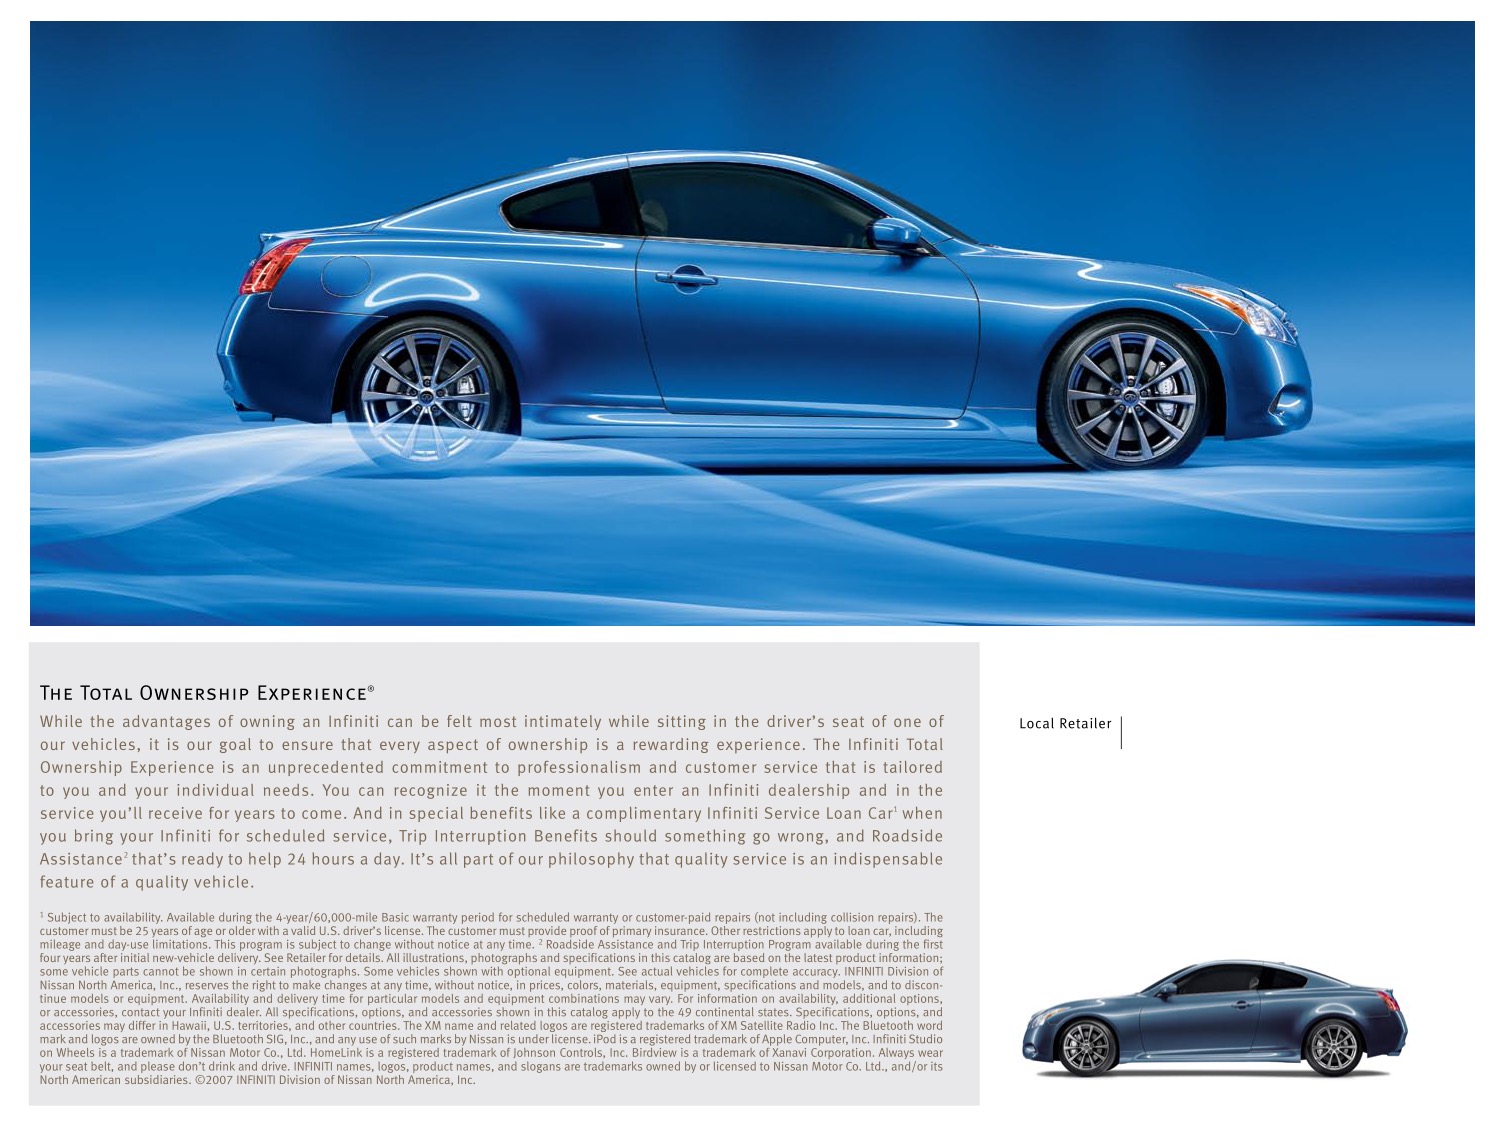 2008 Infiniti G Coupe Brochure Page 2